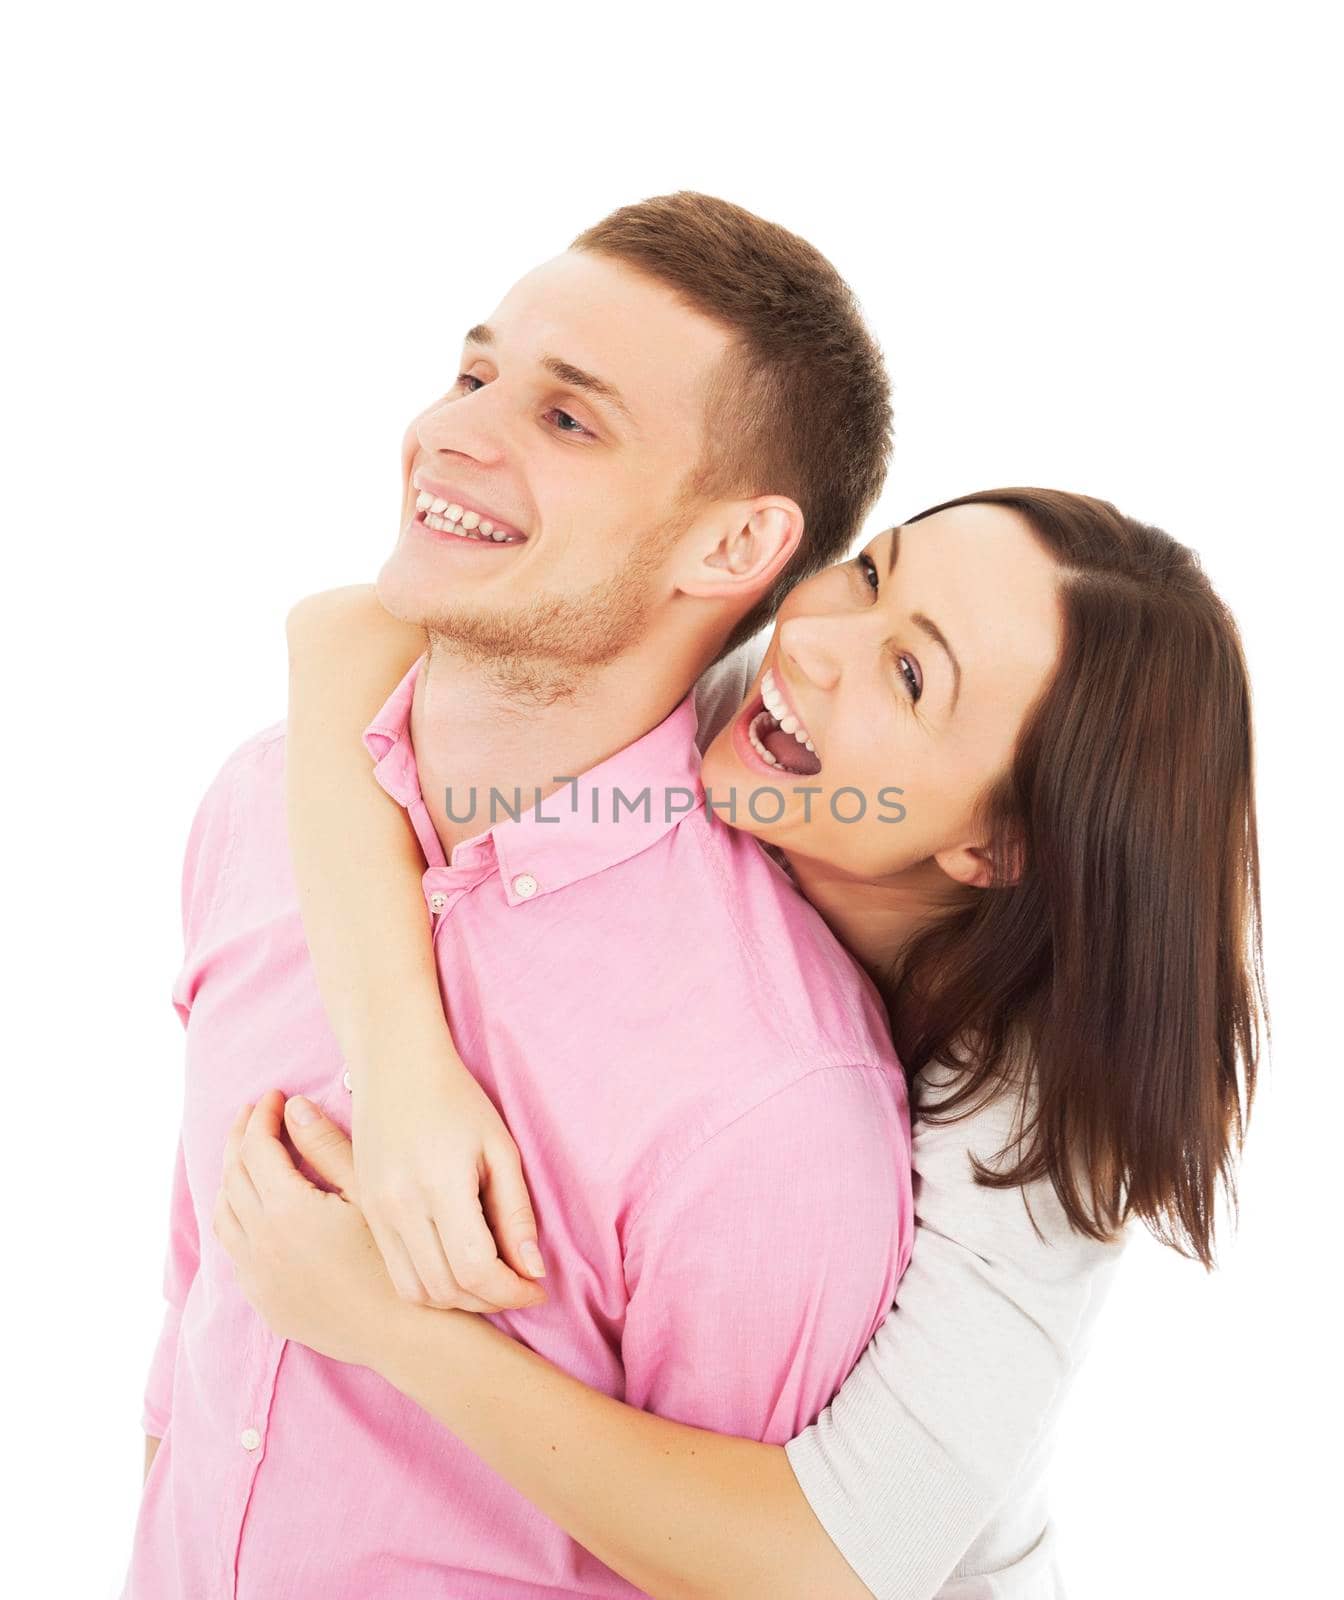 Portrait of a happy Loving couple - Stock Image by Jyliana